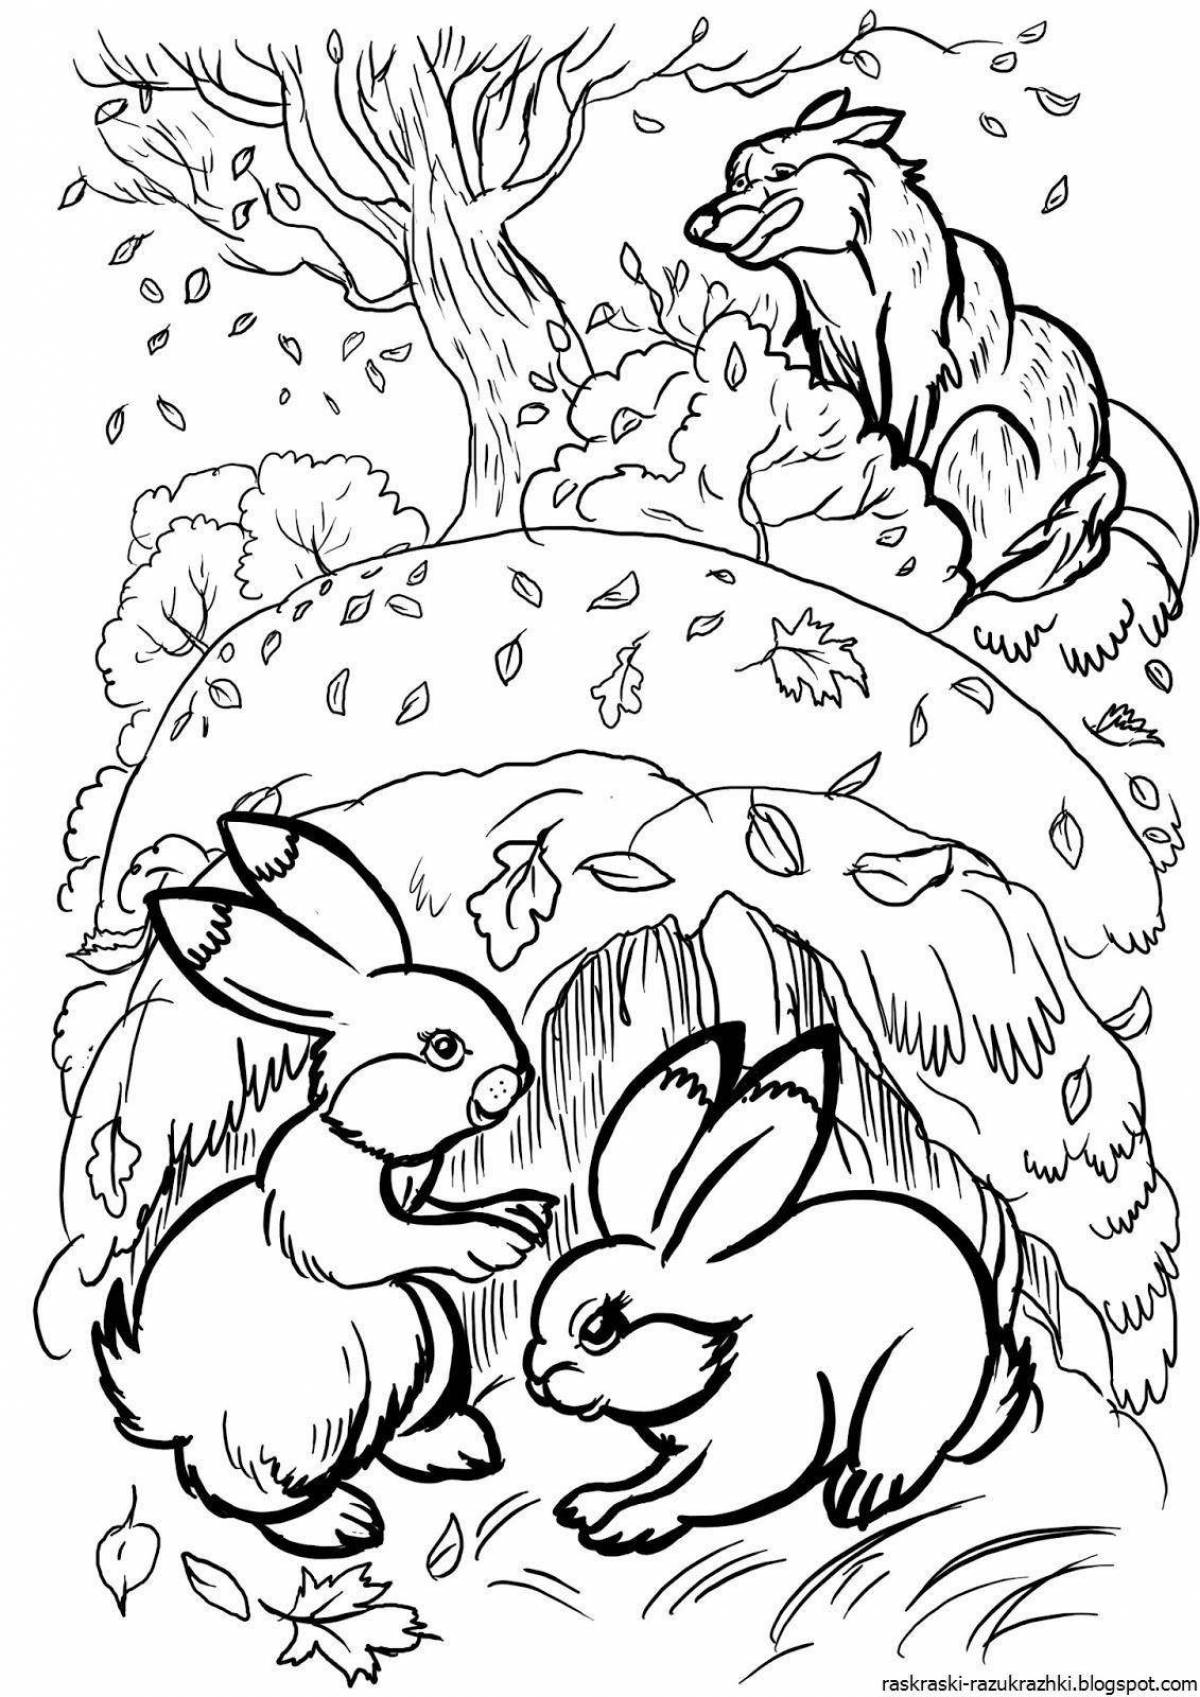 Cute winter animals coloring pages for kids